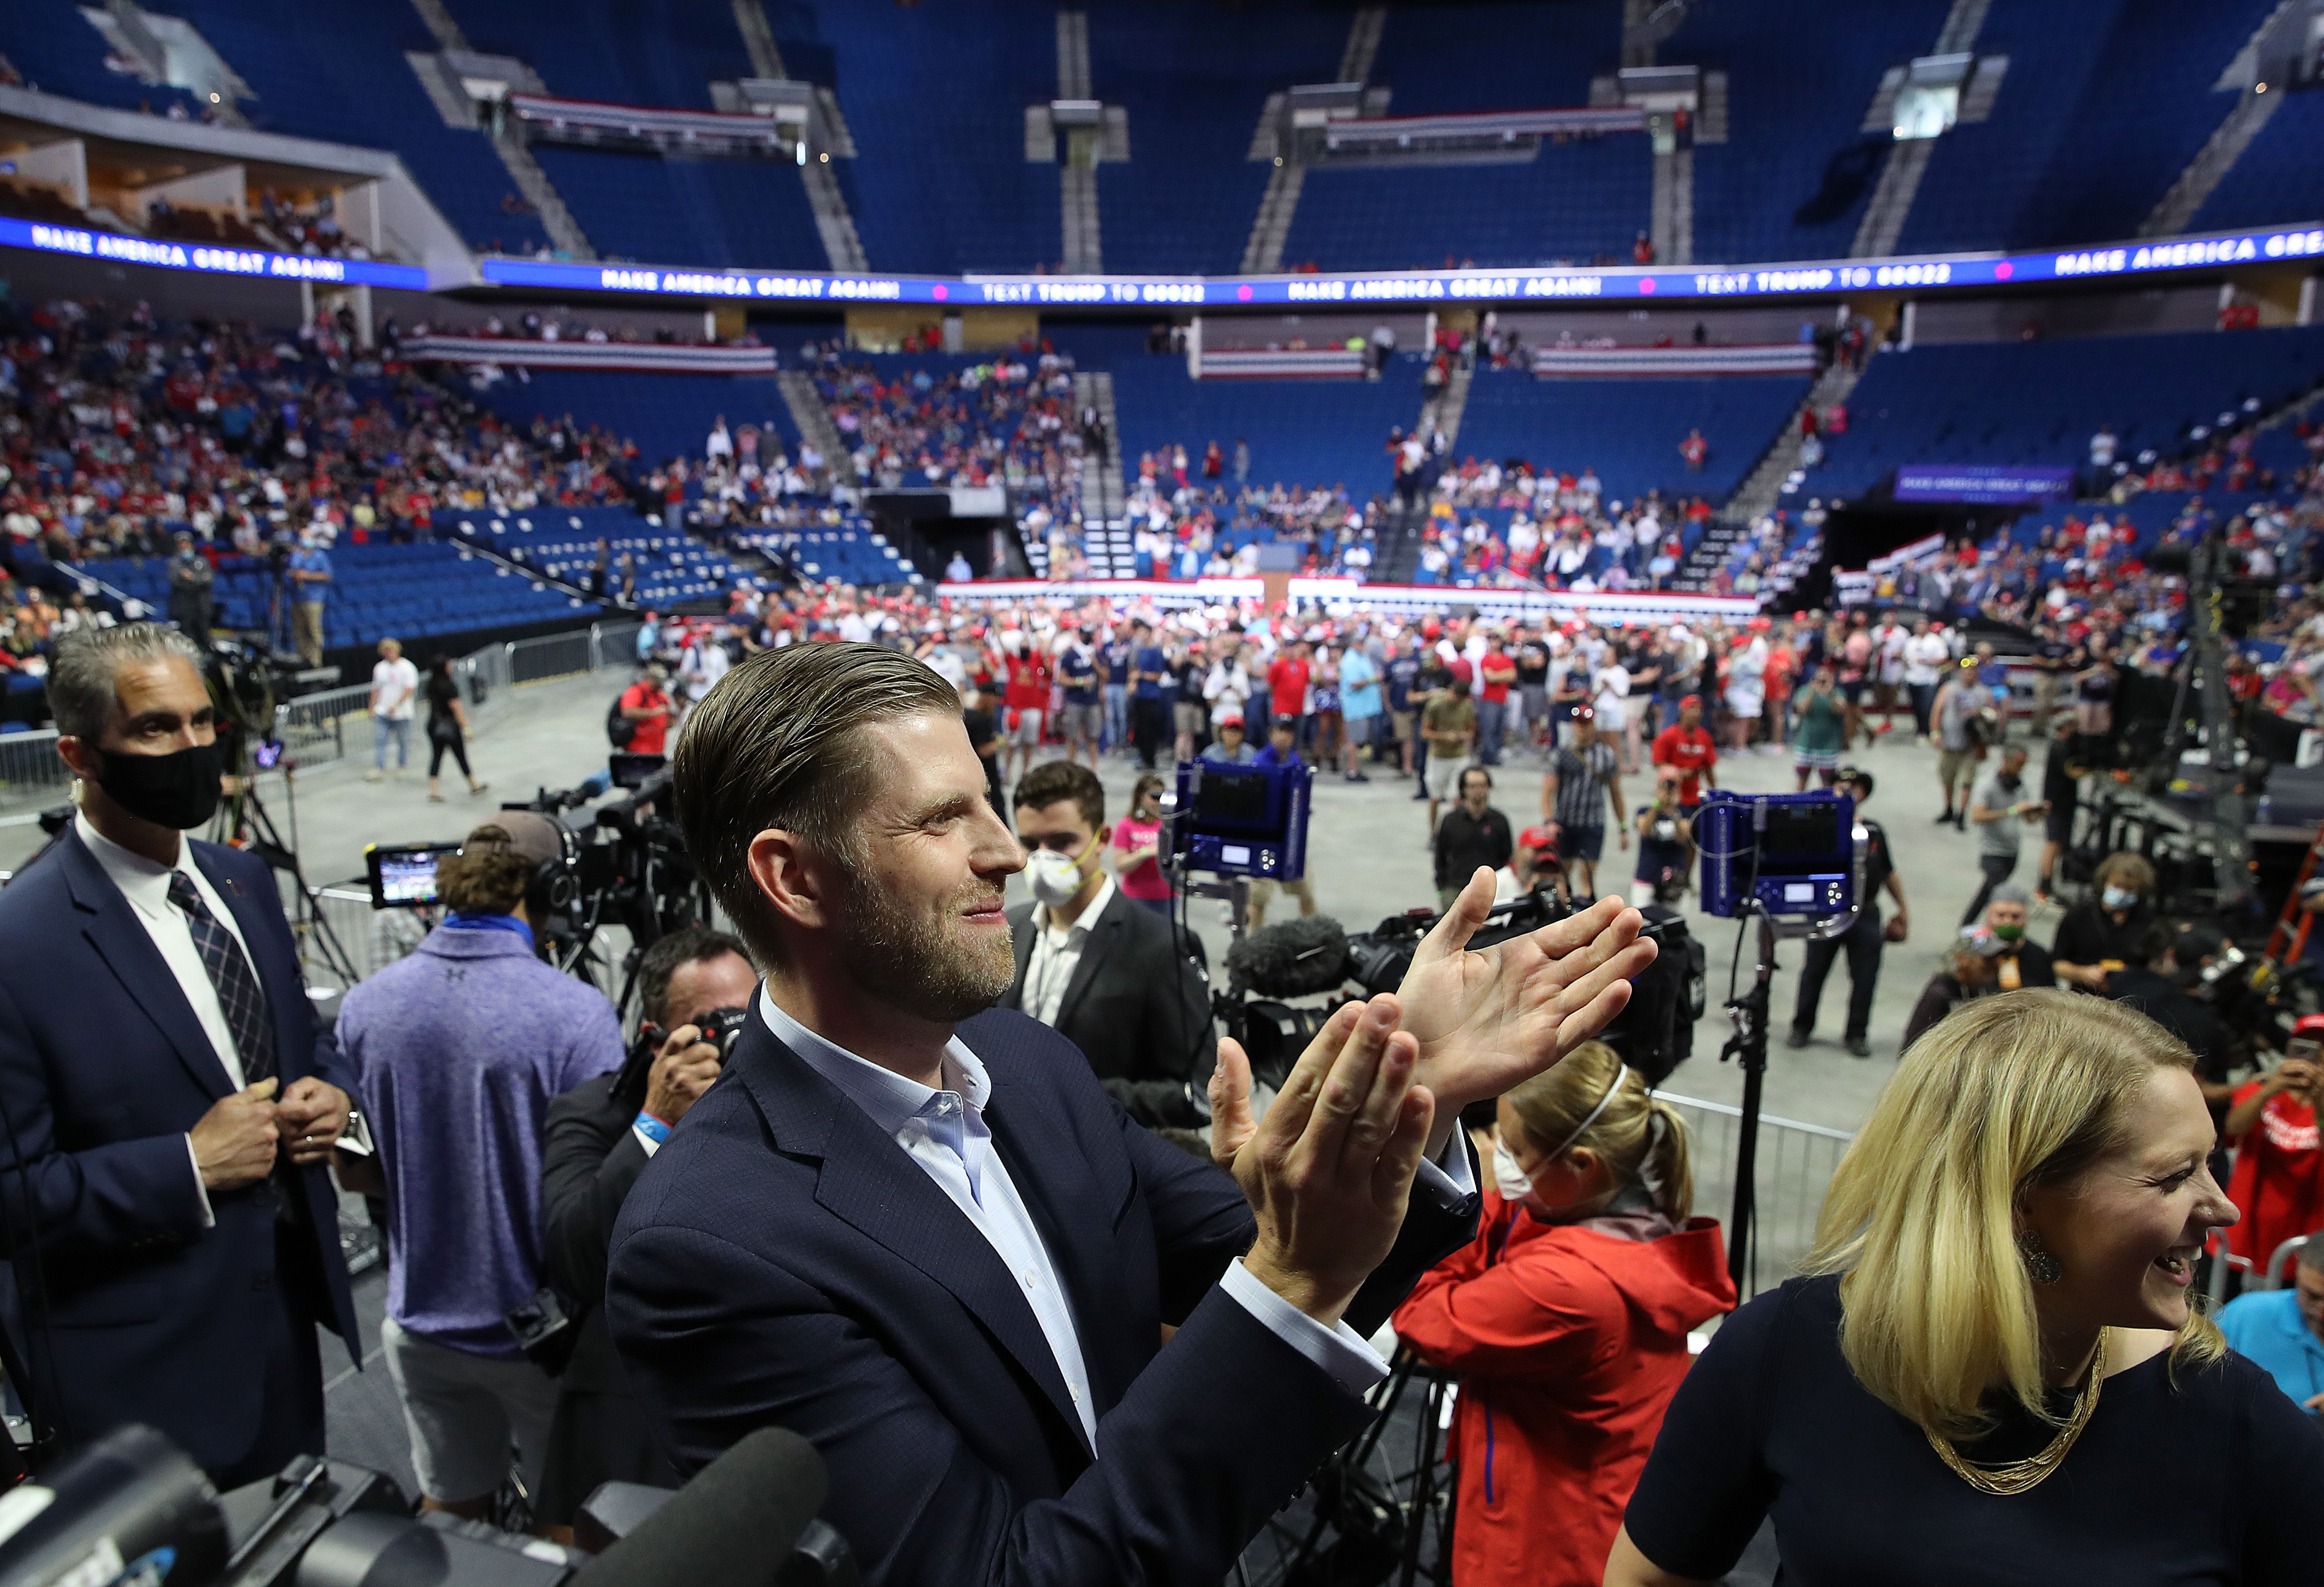  Eric Trump attends a campaign rally for his father U.S. President Donald Trump at the BOK Center, June 20, 2020 in Tulsa, Oklahoma.